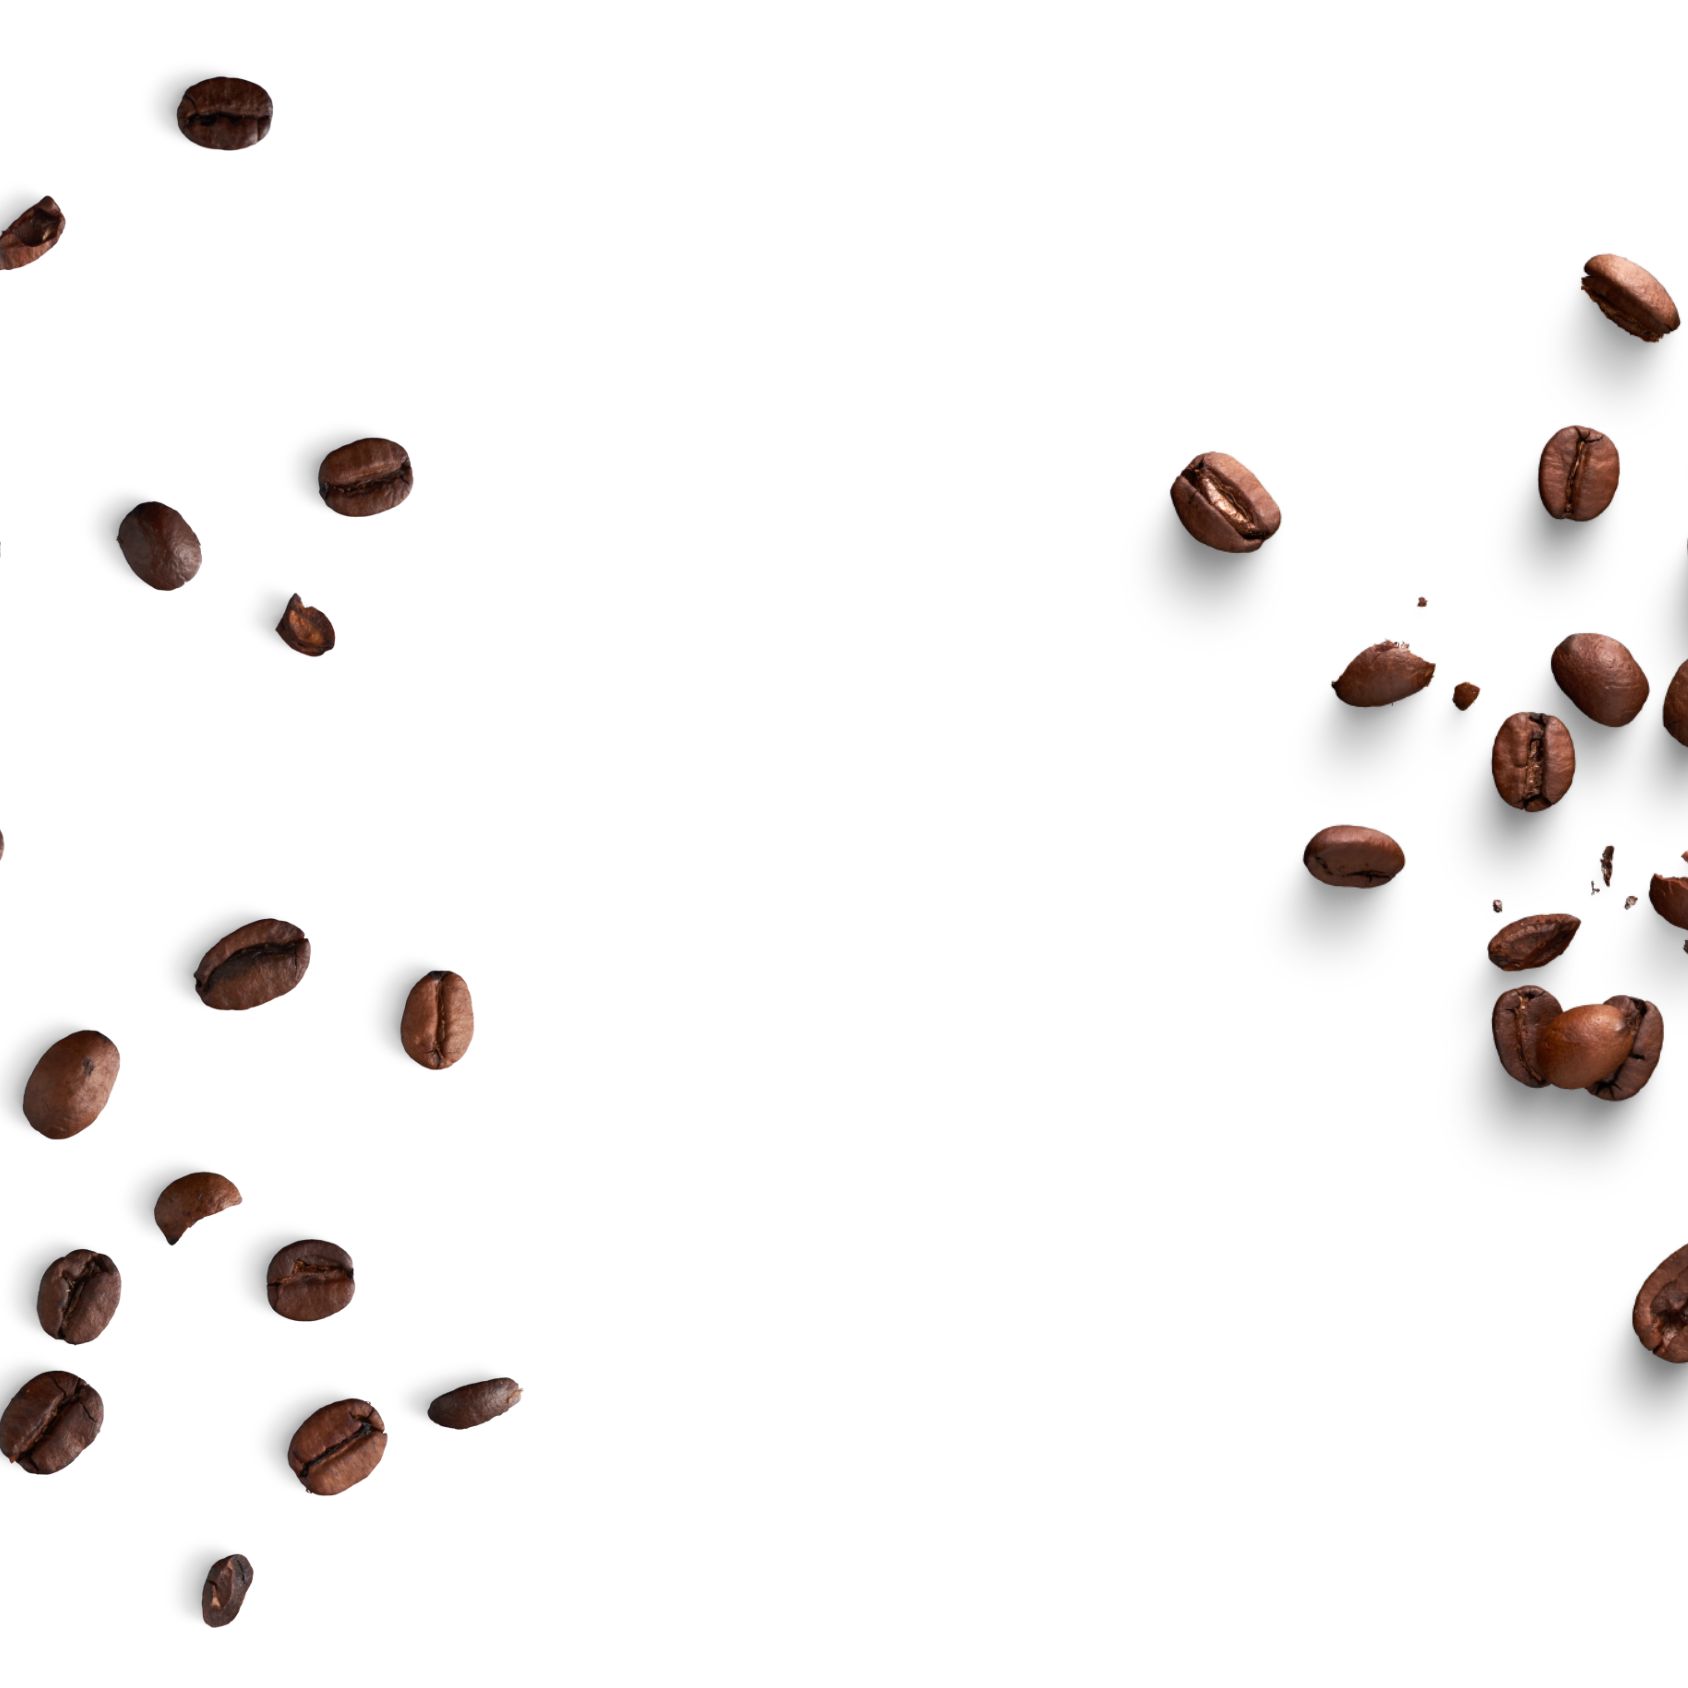 custom coffee beans allow your coffee machine to extract naturally sweet coffee